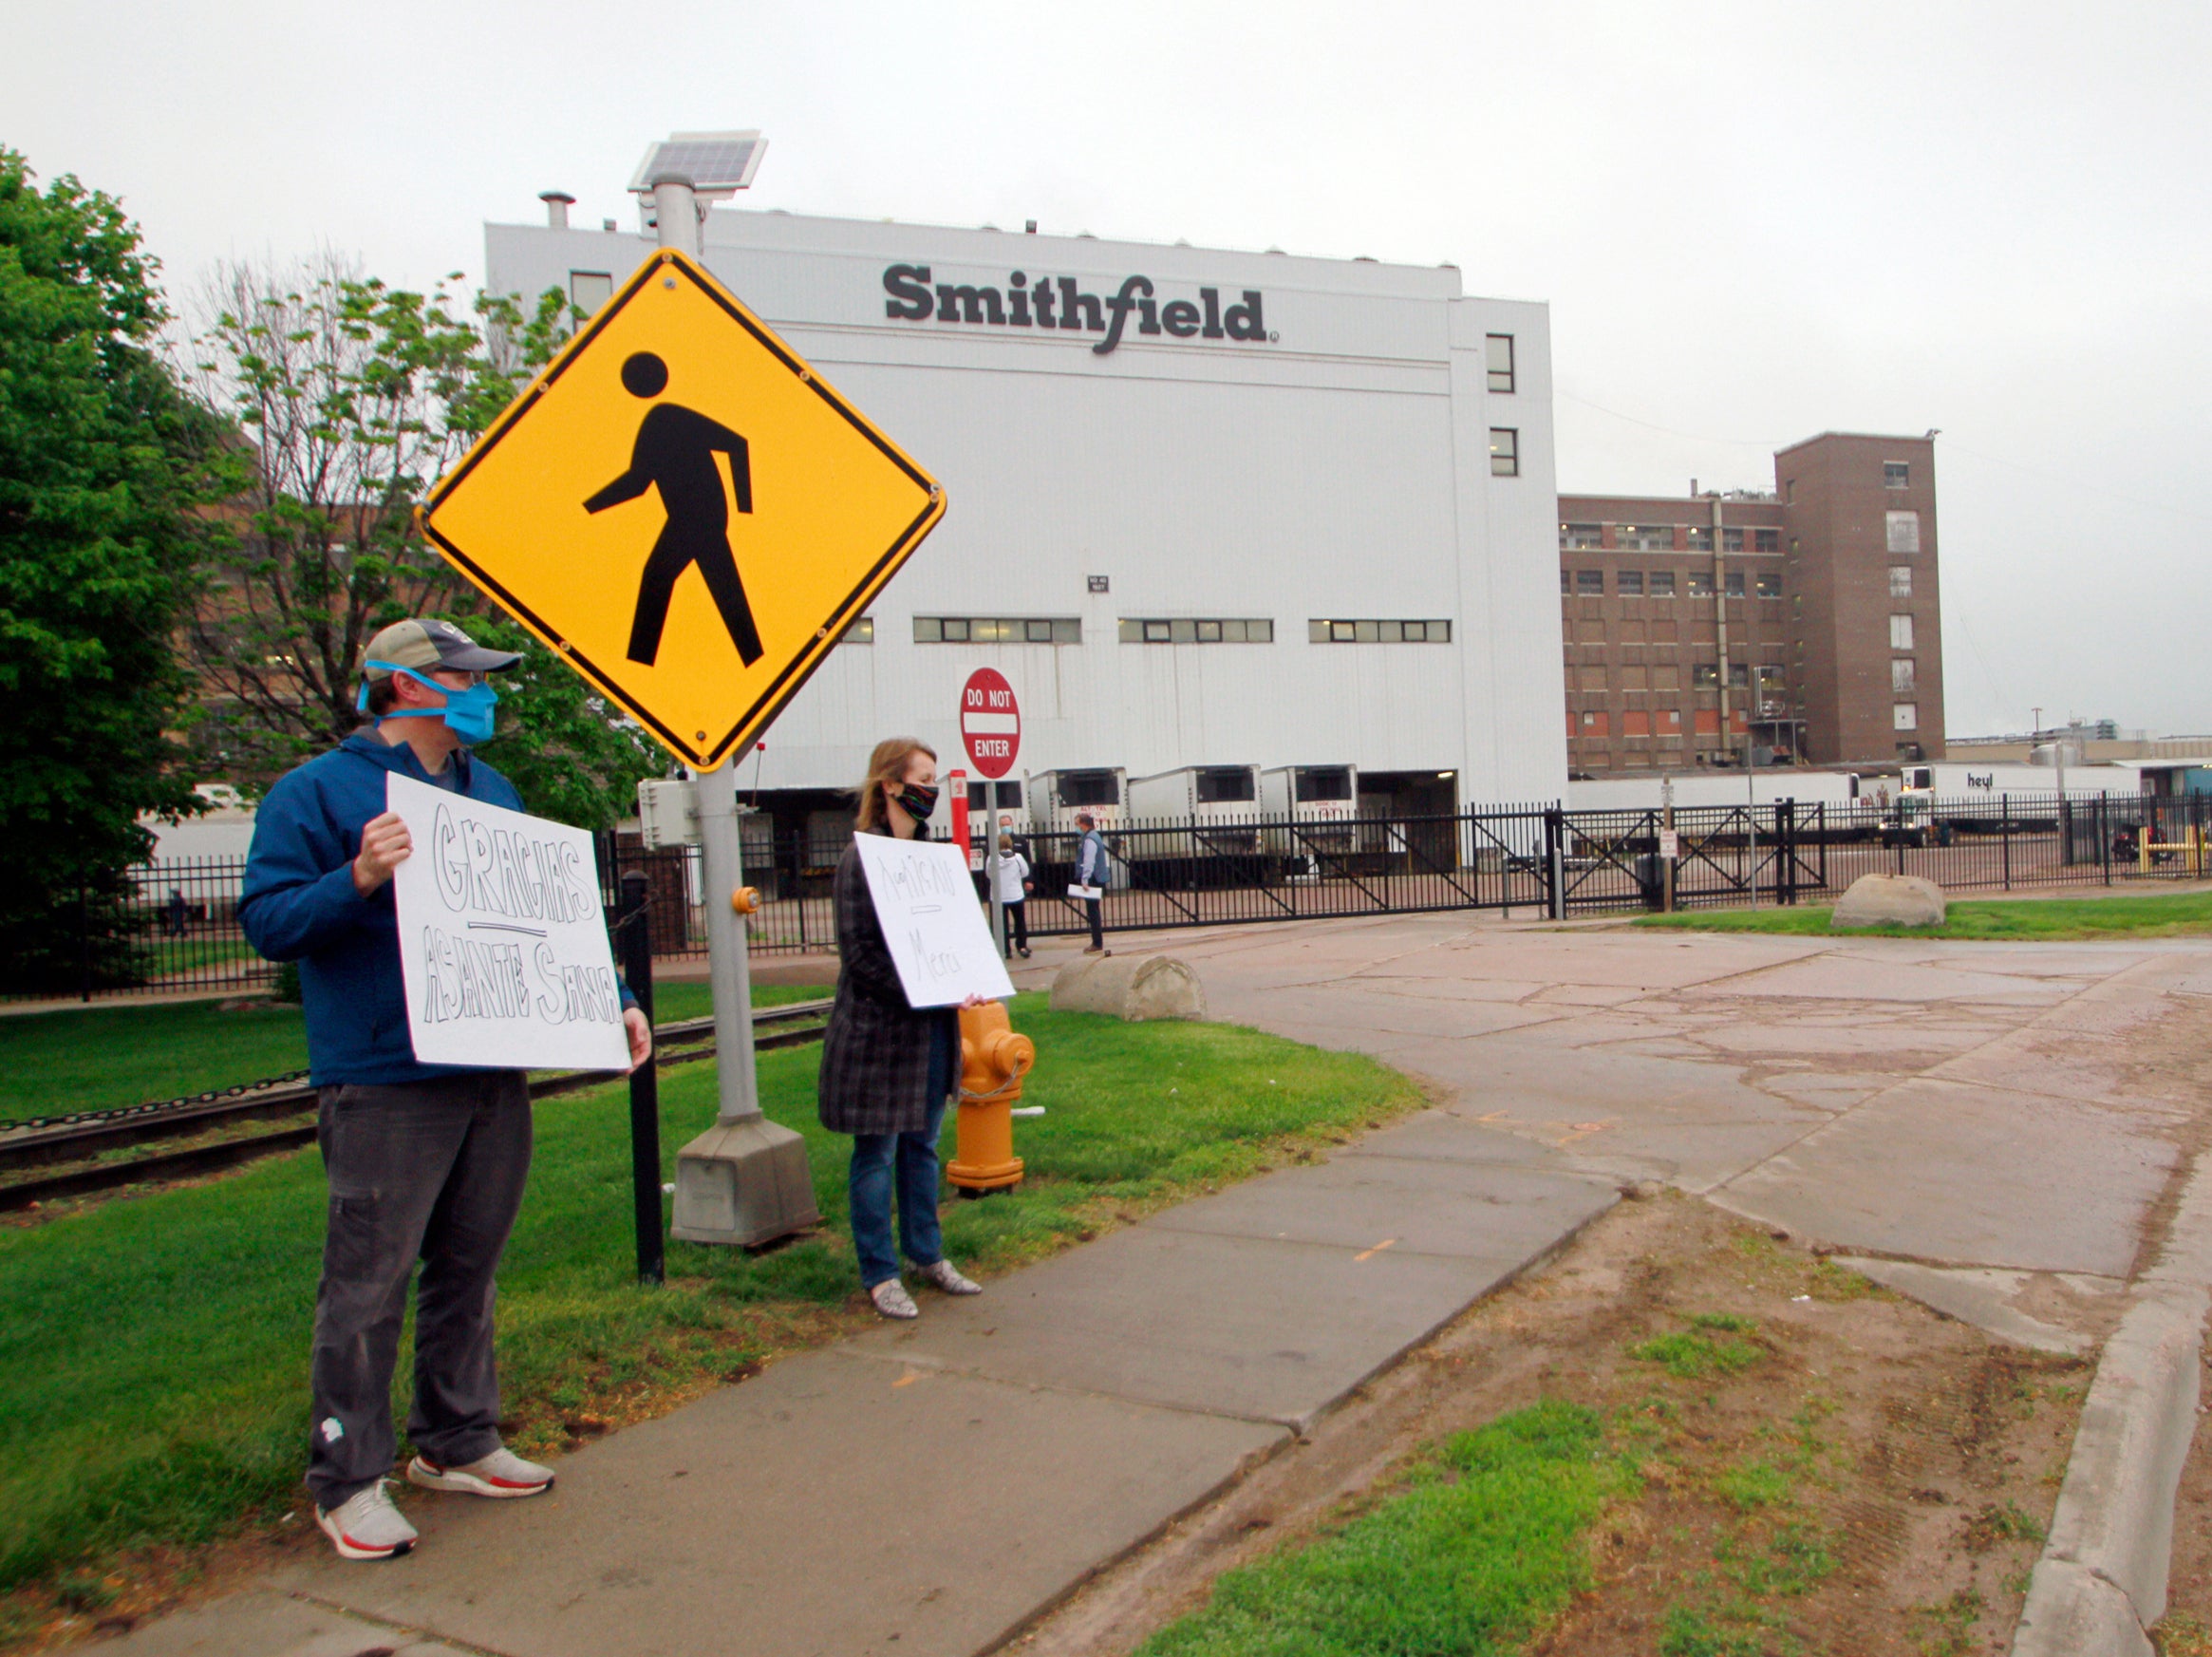 Residents cheer and hold thank you signs to greet employees of a Smithfield pork processing plant as they begin their shift in Sioux Falls, SD